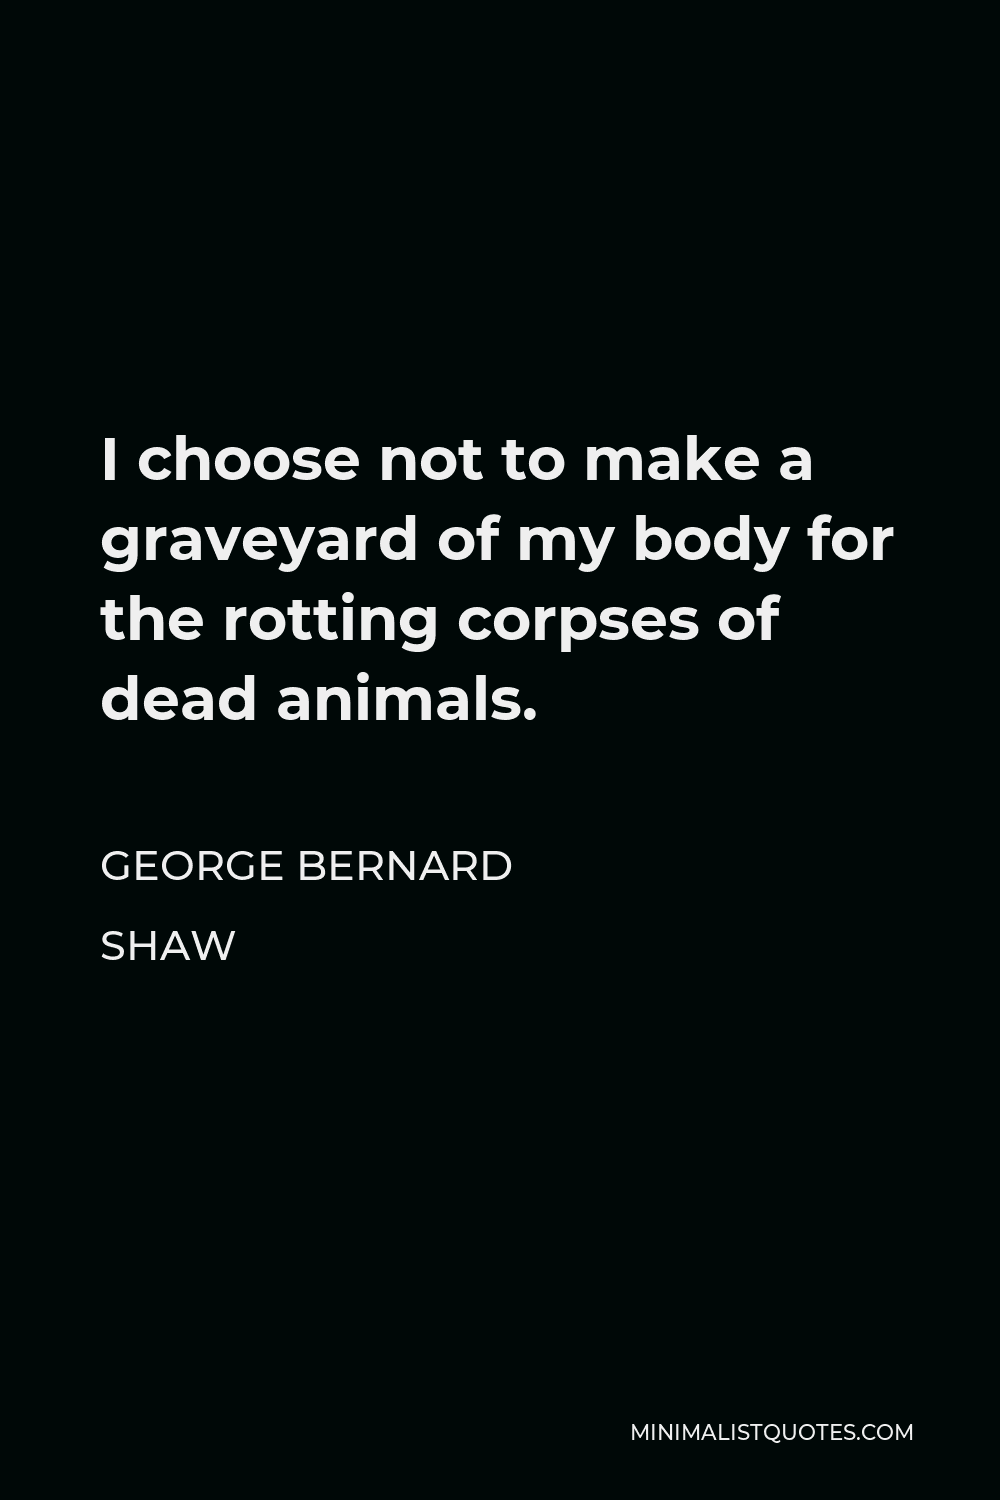 George Bernard Shaw Quote - I choose not to make a graveyard of my body for the rotting corpses of dead animals.